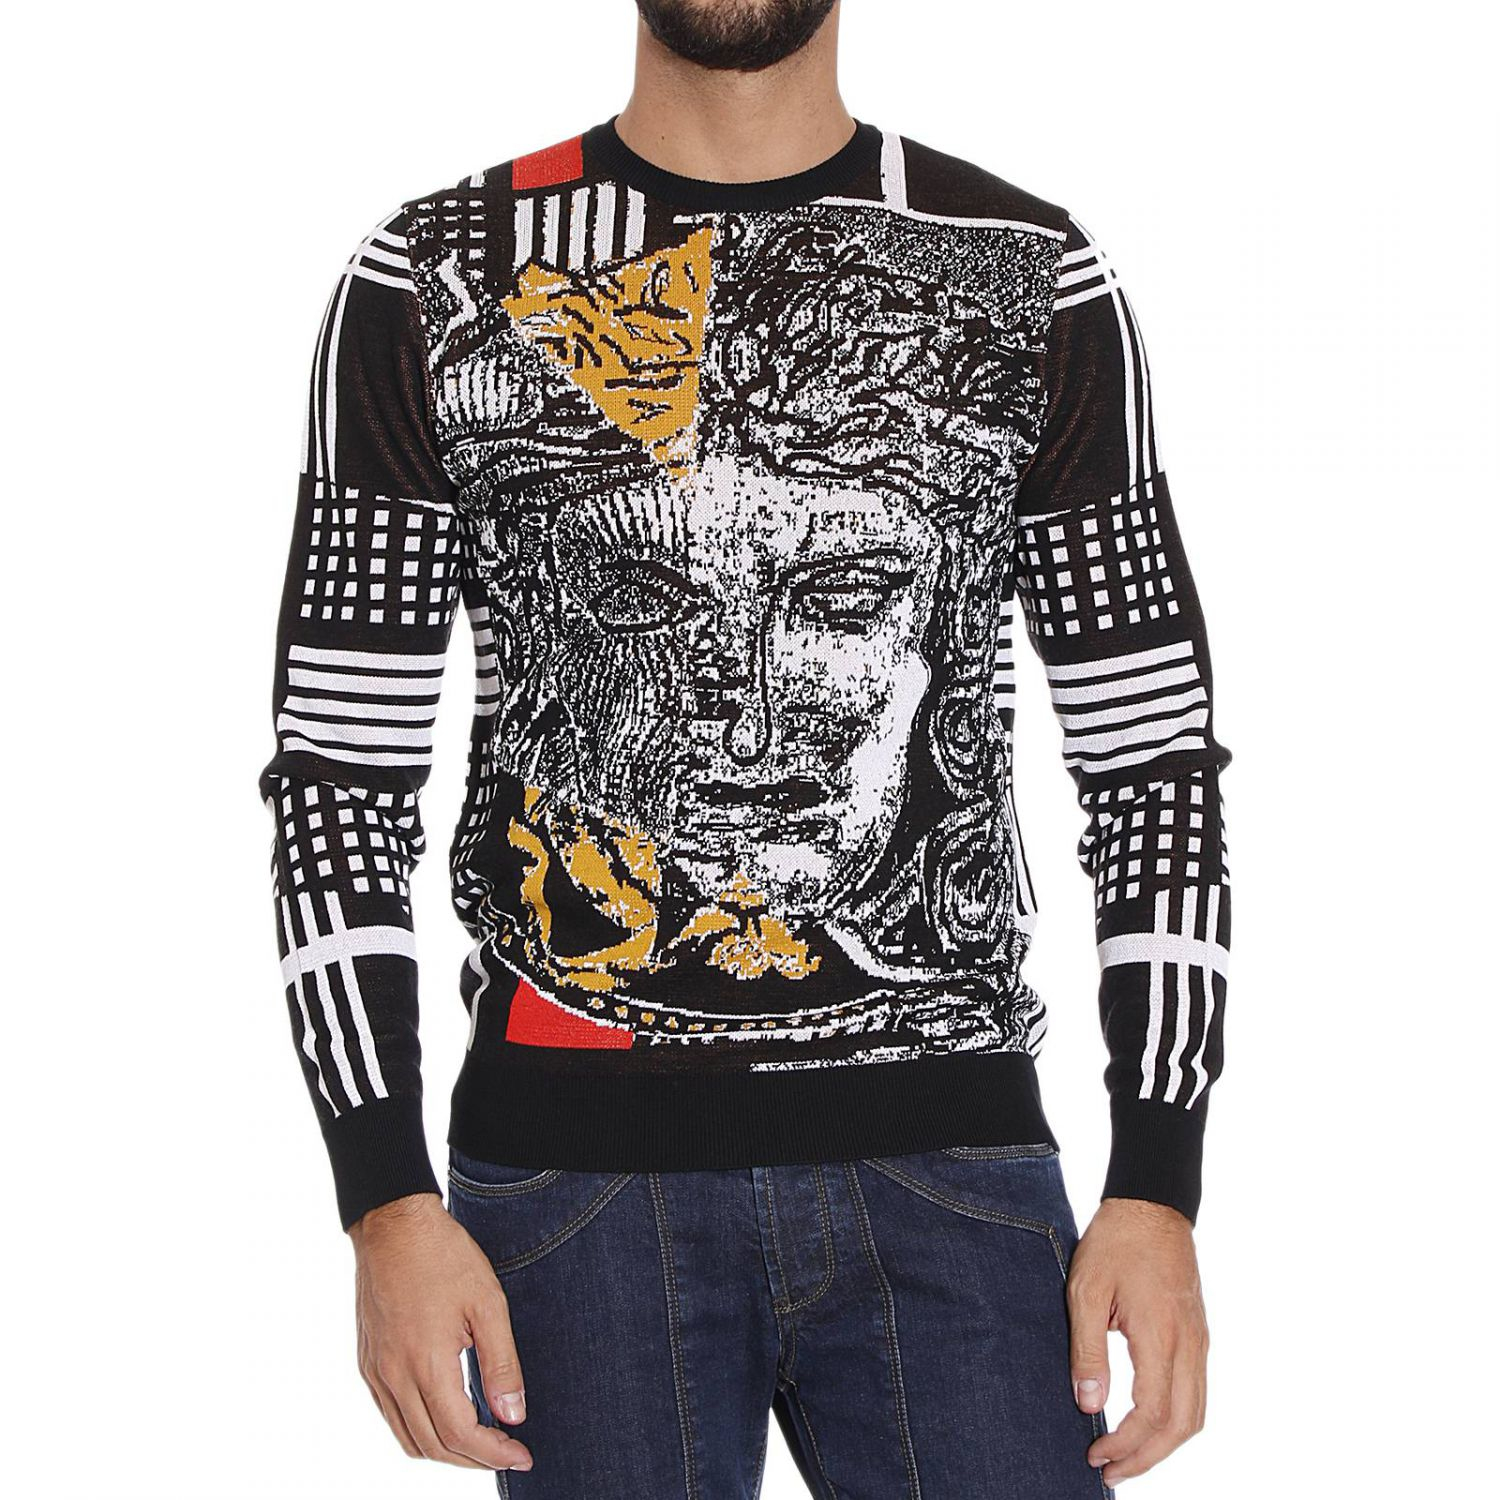 Versace Synthetic Jumper in Black for Men - Lyst